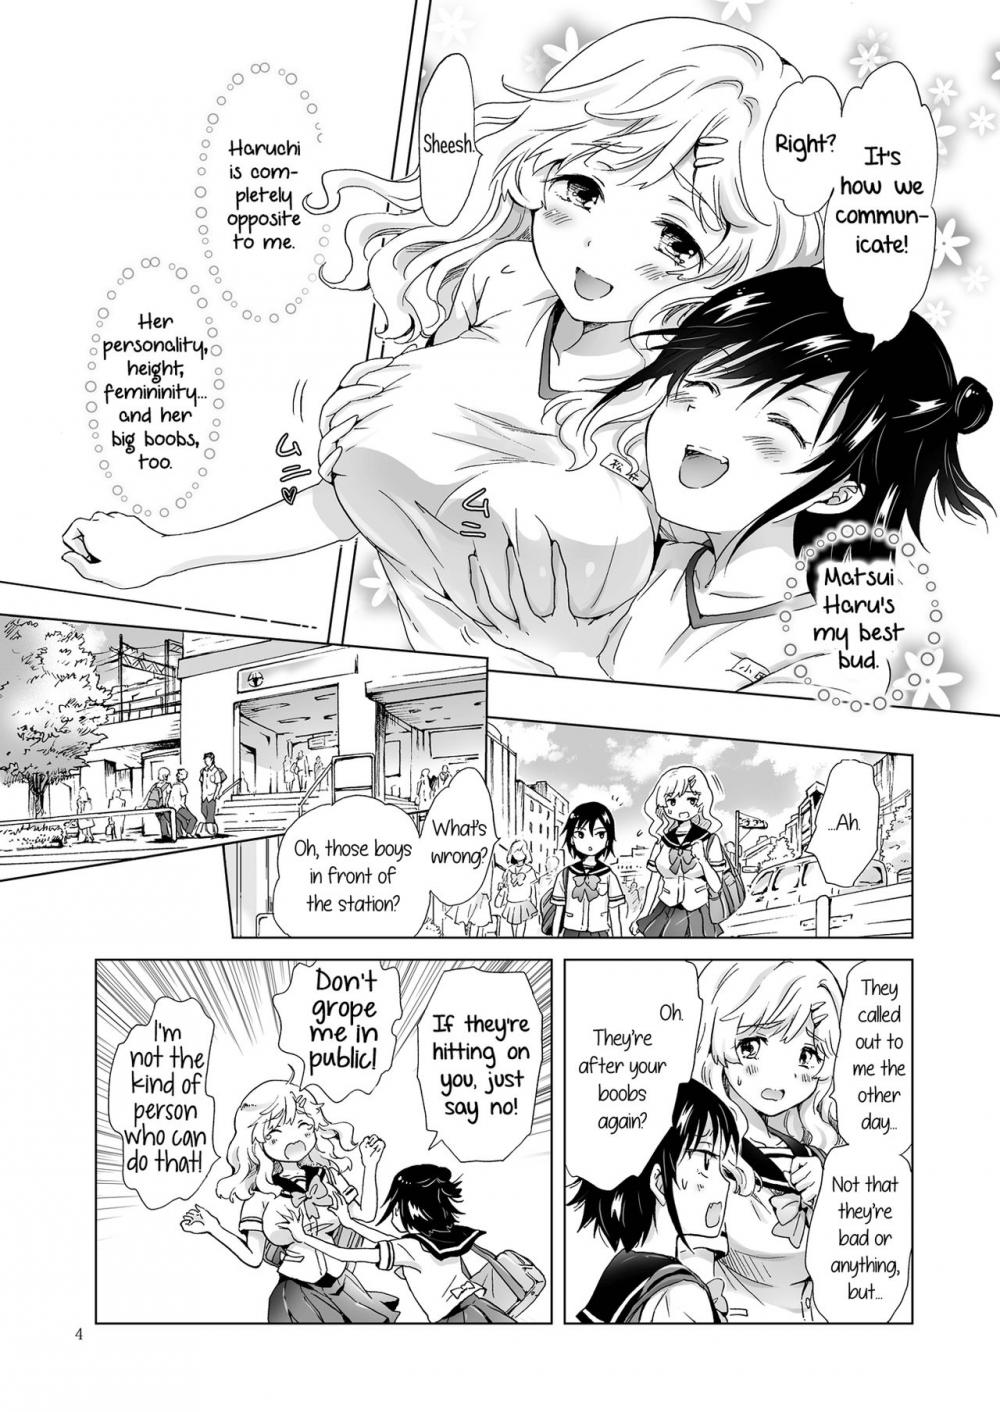 Hentai Manga Comic-How Well-Stacked and Surfboard Swapped Bodies-Read-3